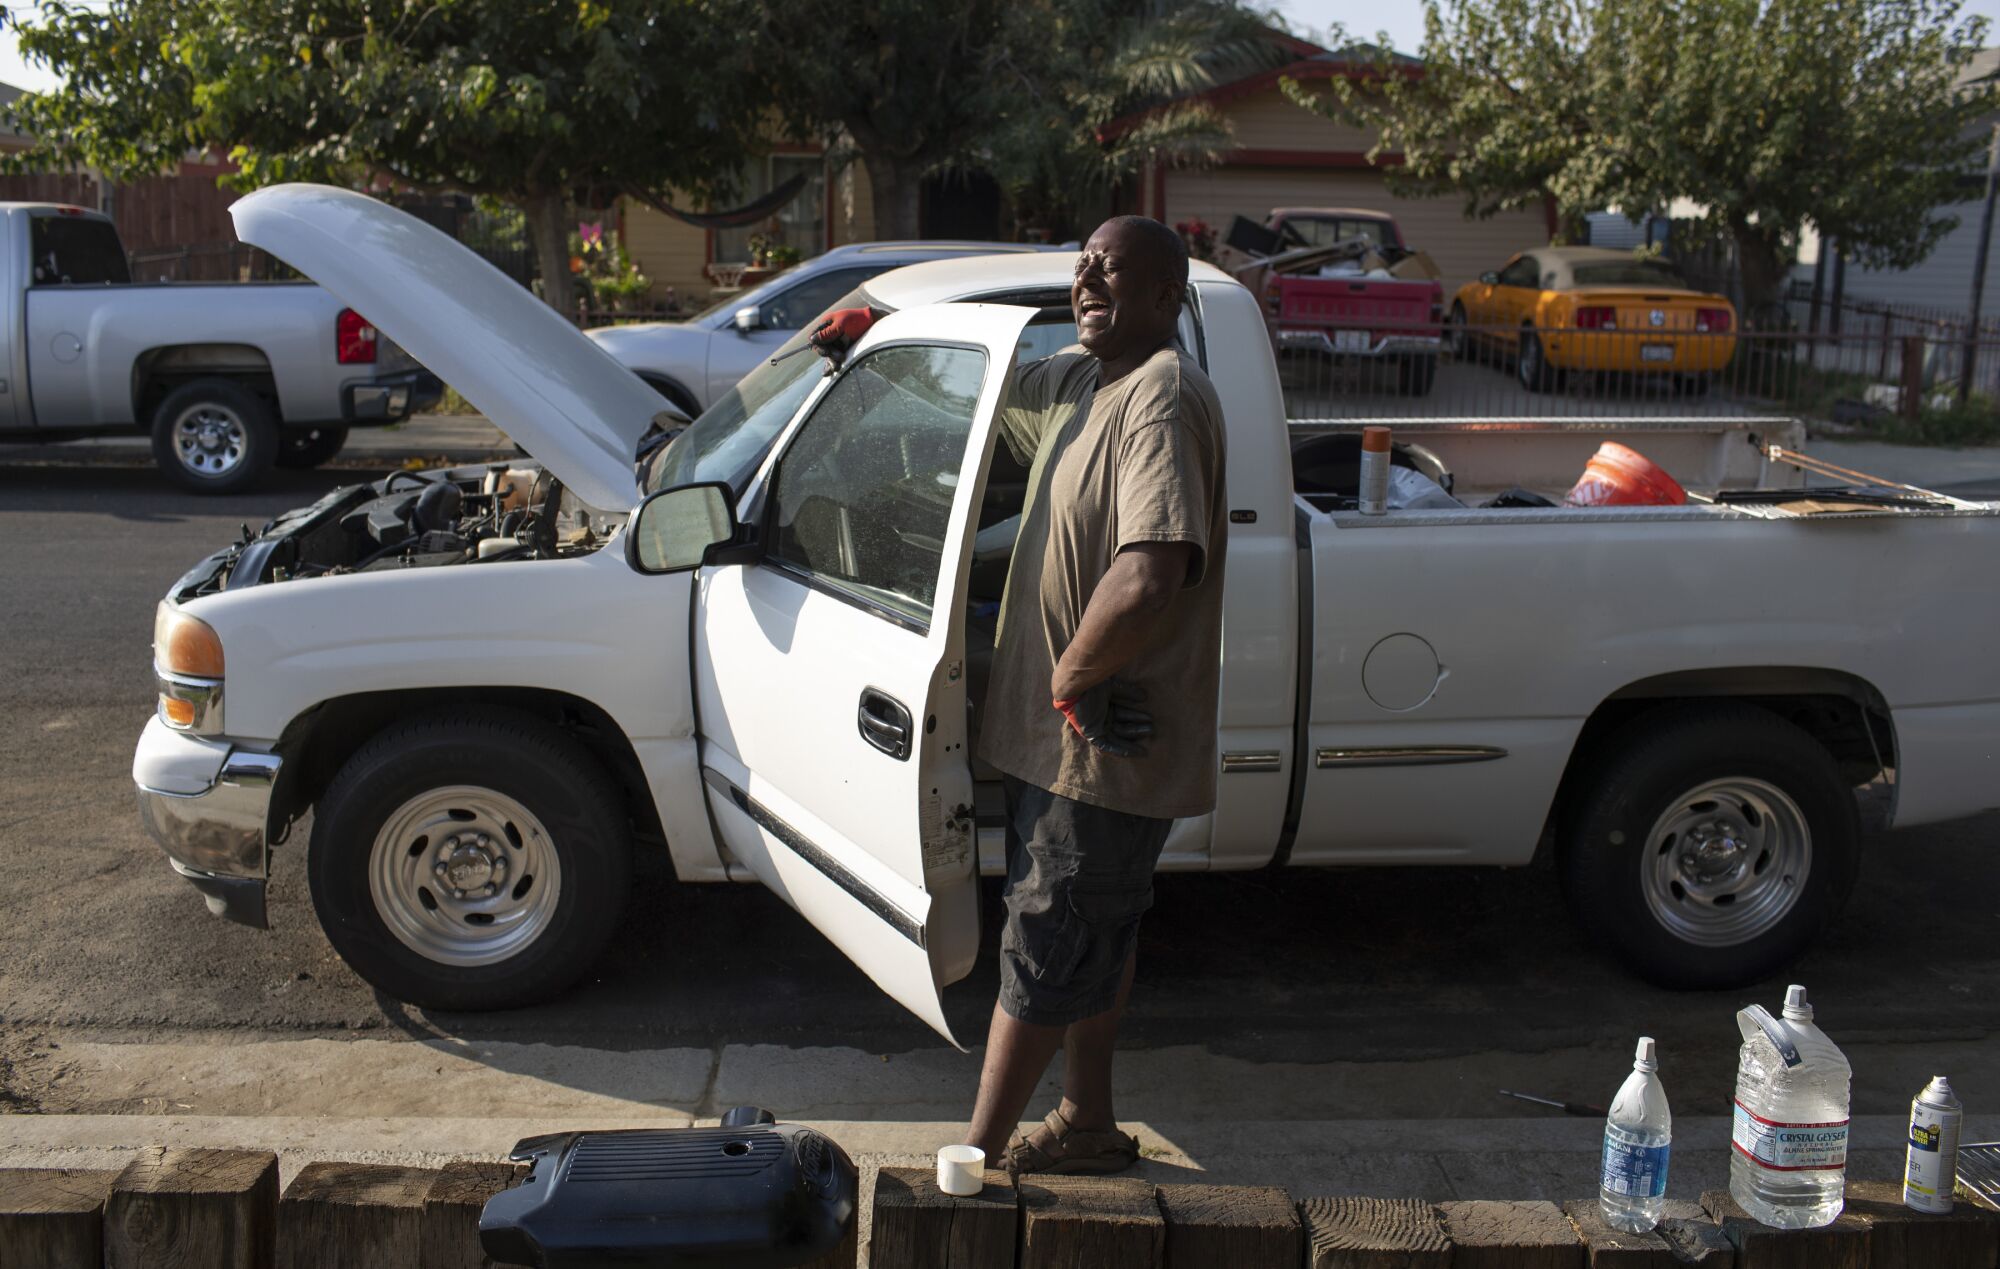 New resident Gailton Moore spends his time refurbishing a pickup truck in front of his home in Stratford.